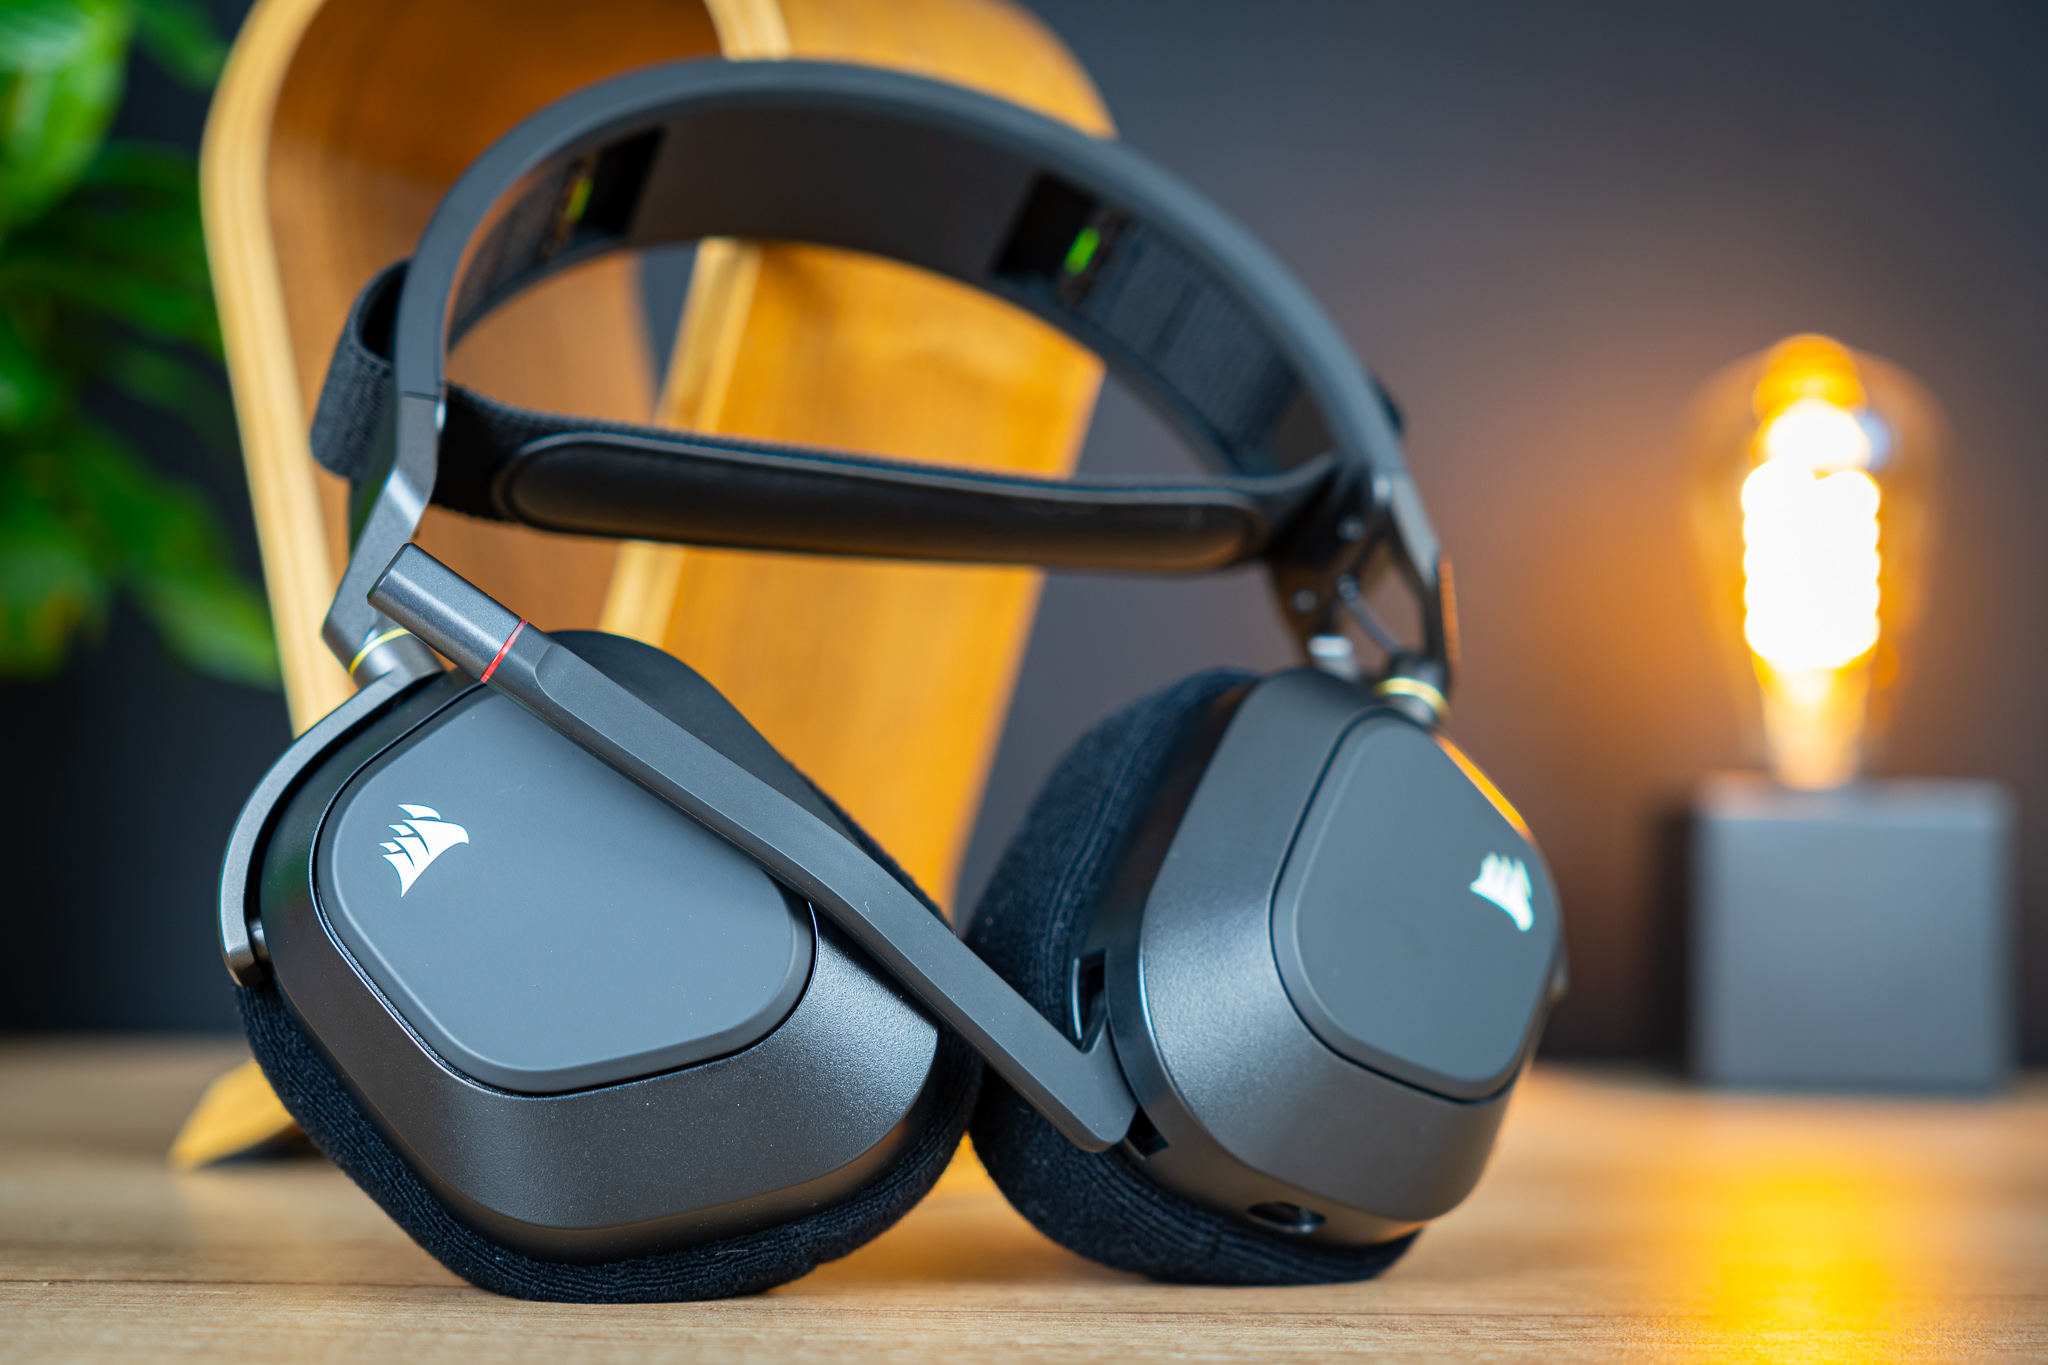 Corsair HS80 RGB Wireless Review: Upper-middle Class